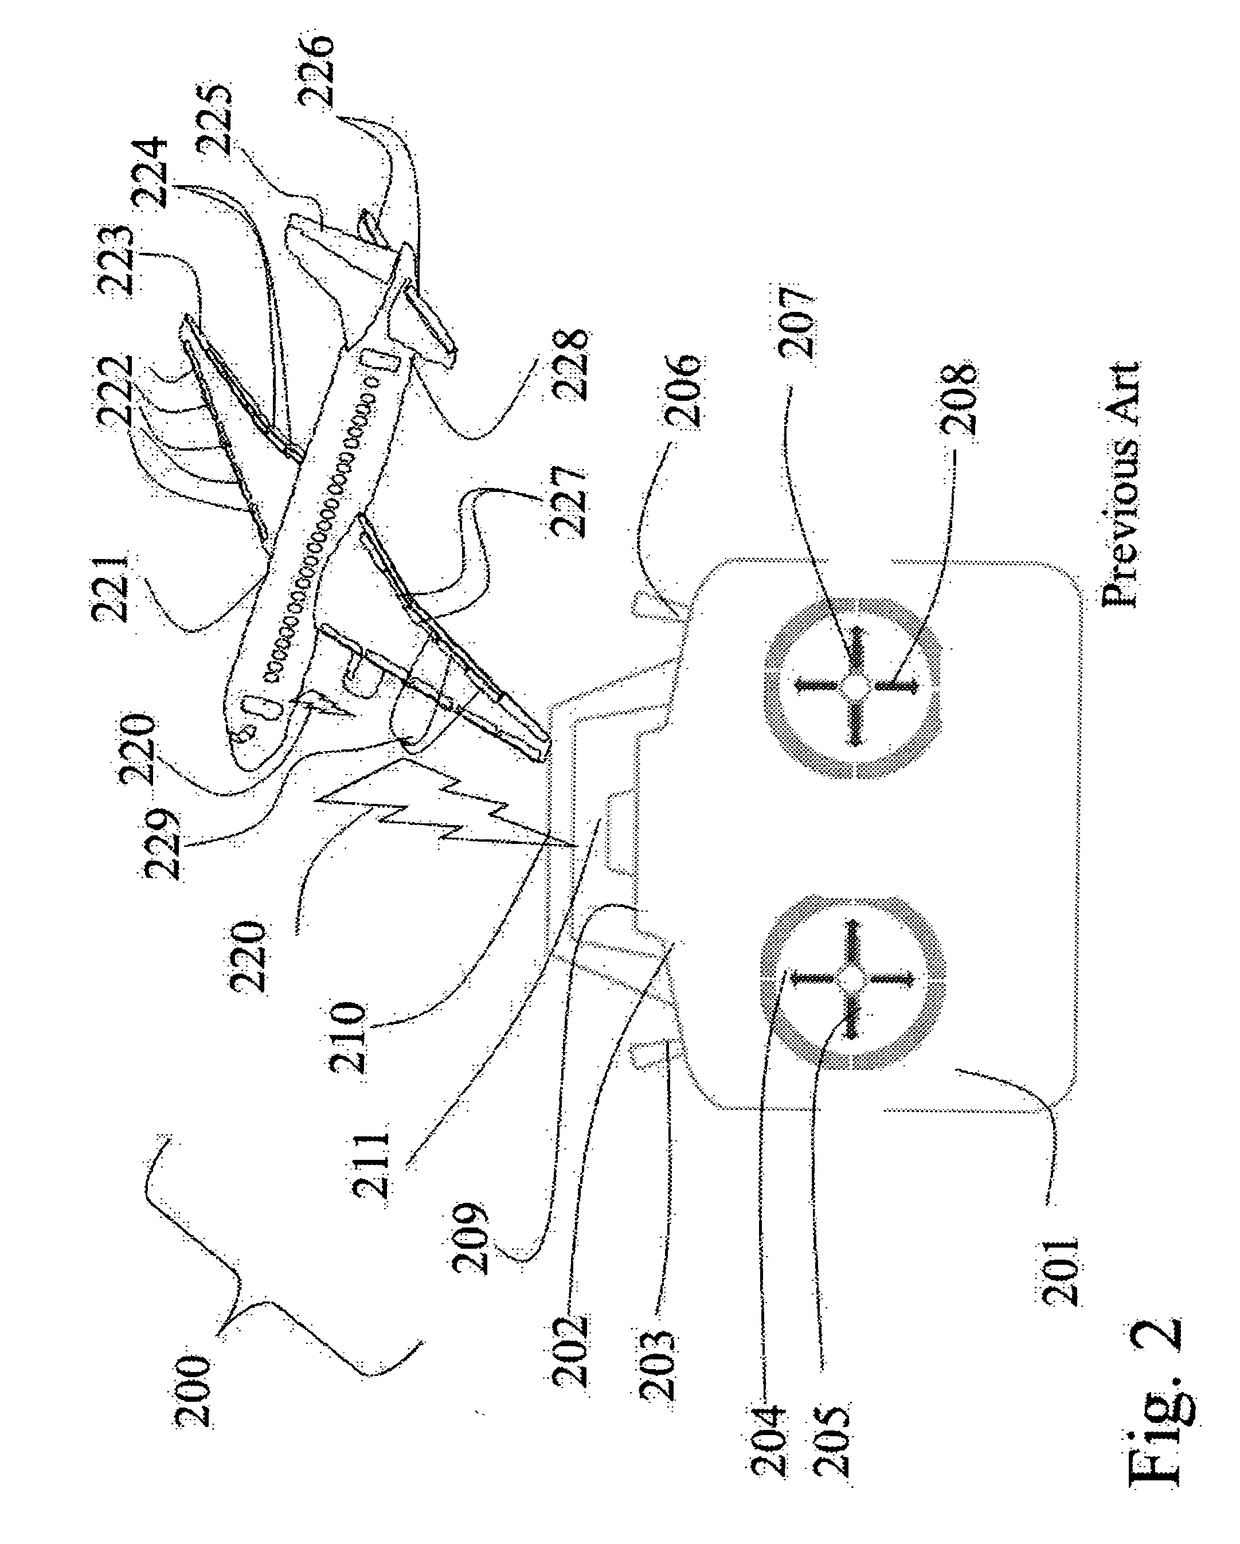 Method and device to improve the flying abilities of the airborne devices operator